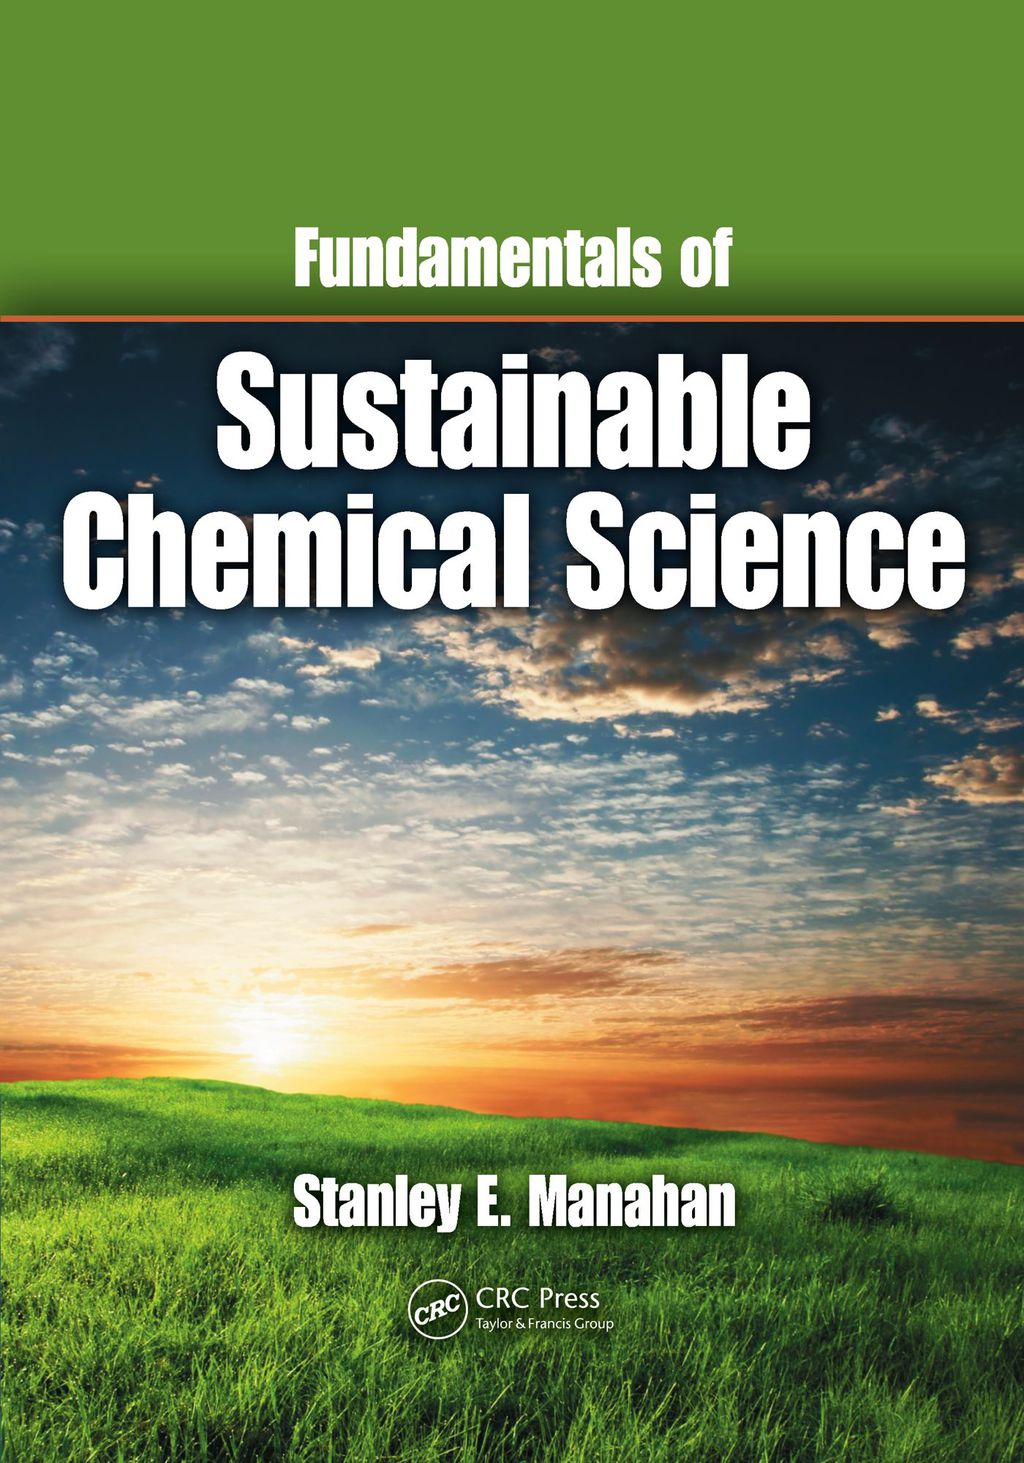 Fundamentals of Sustainable Chemical Science (eBook) - Stanley E. Manahan